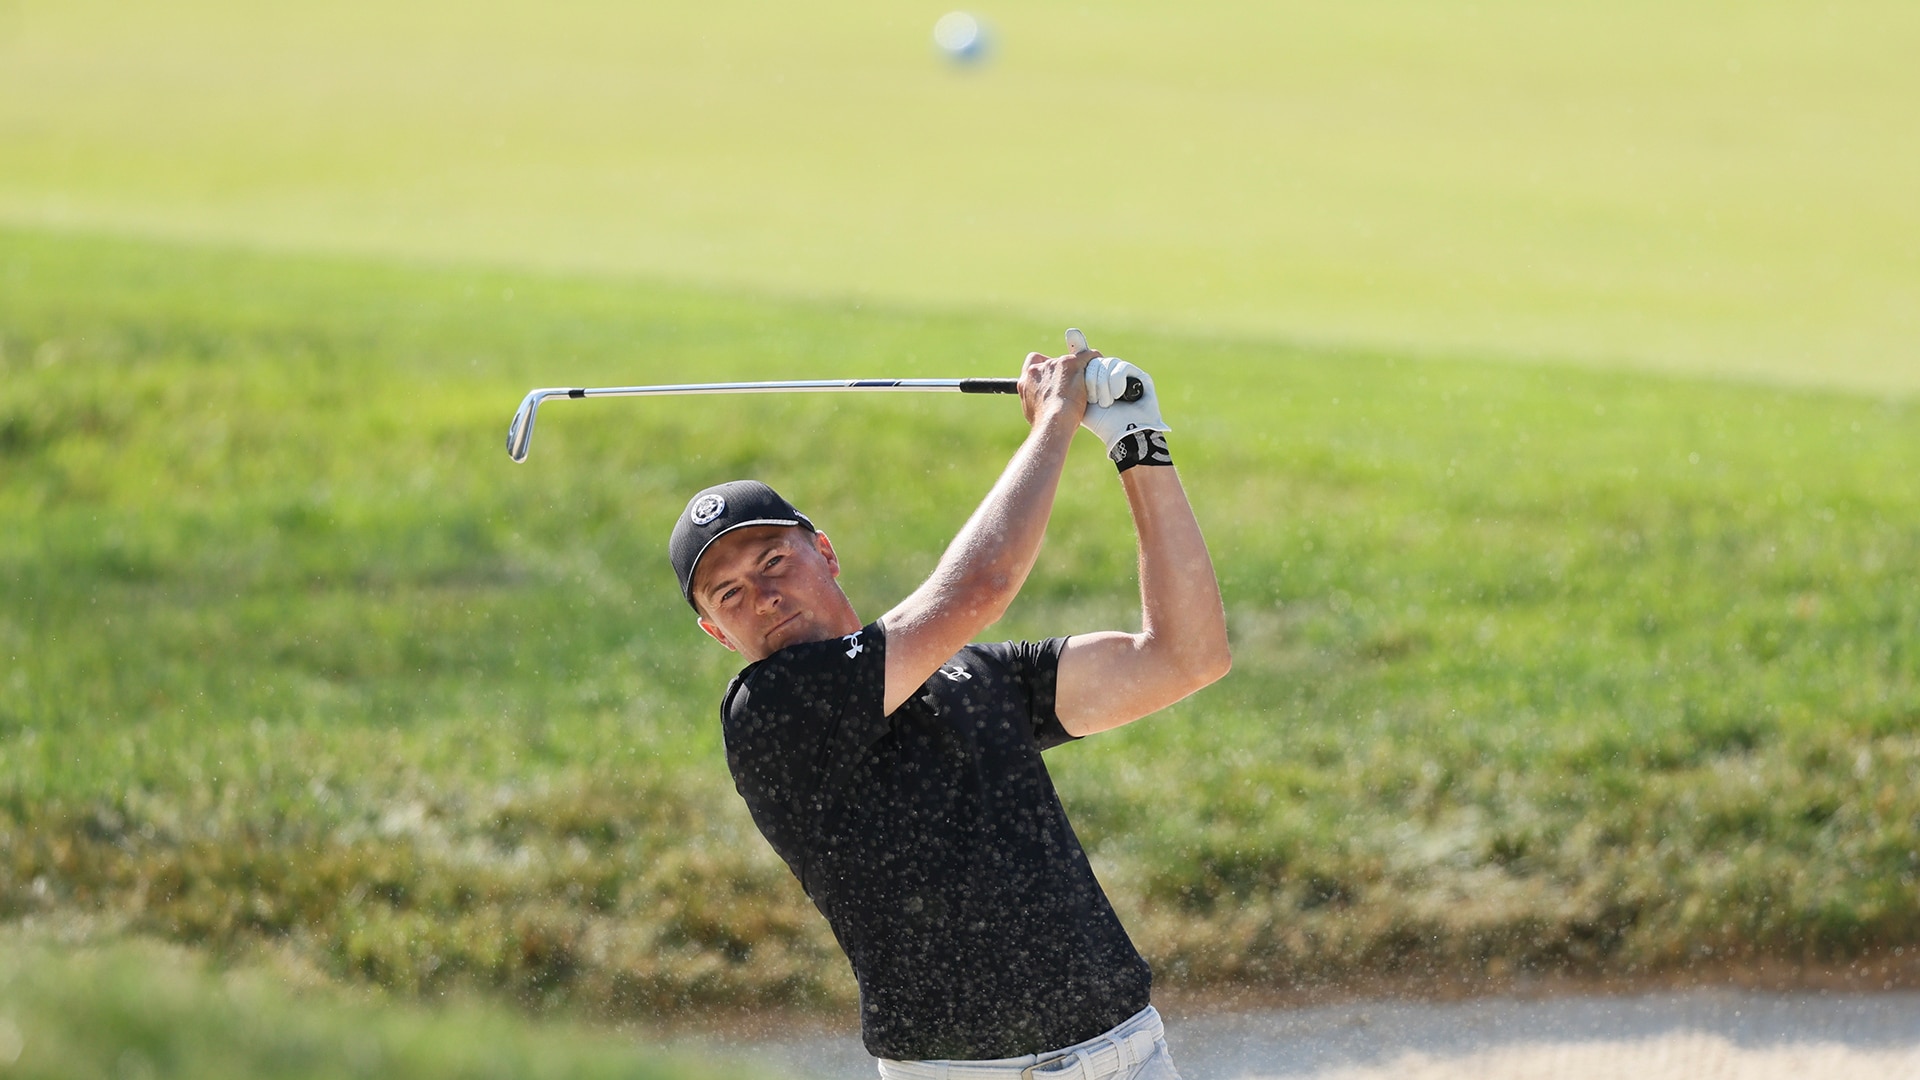 Bunker practice pays off as Jordan Spieth just two back at 2023 Memorial Tournament